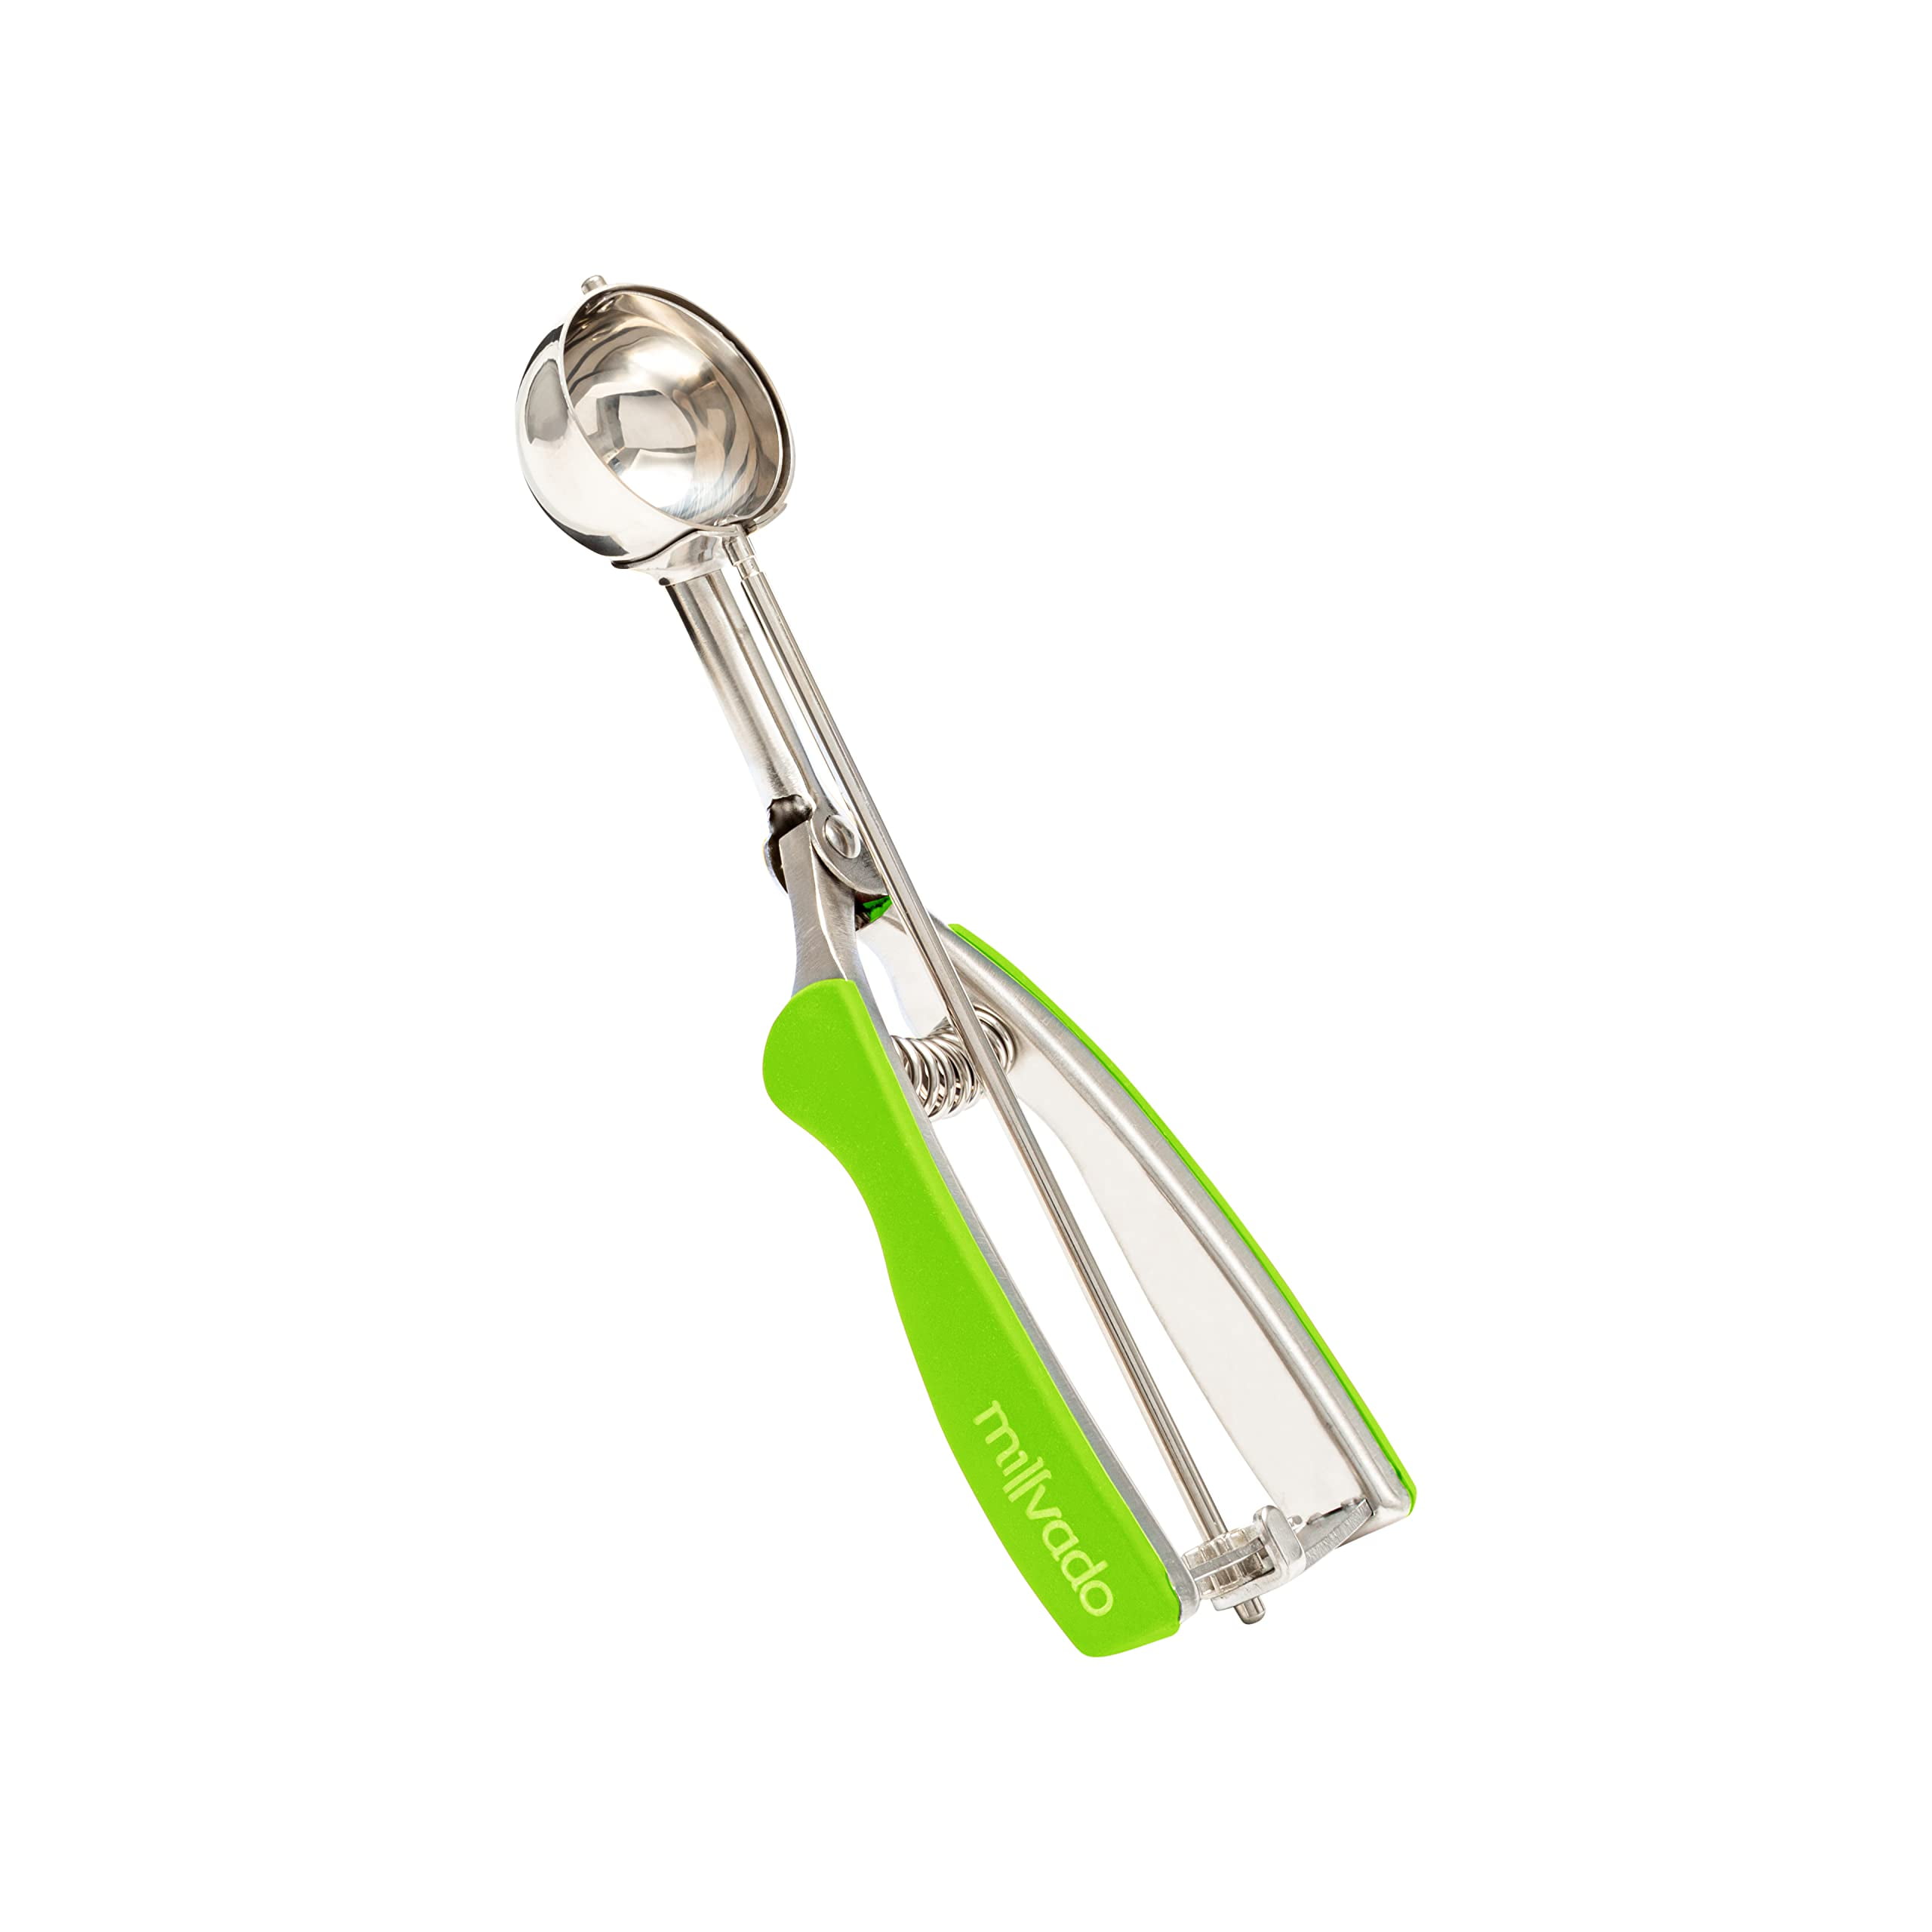 Spring Chef - Cookie Scoop, High Quality Multifunctional Scoop for Baking,  Melon Baller, Protein Balls and Meatballs Maker, Stainless Steel Small